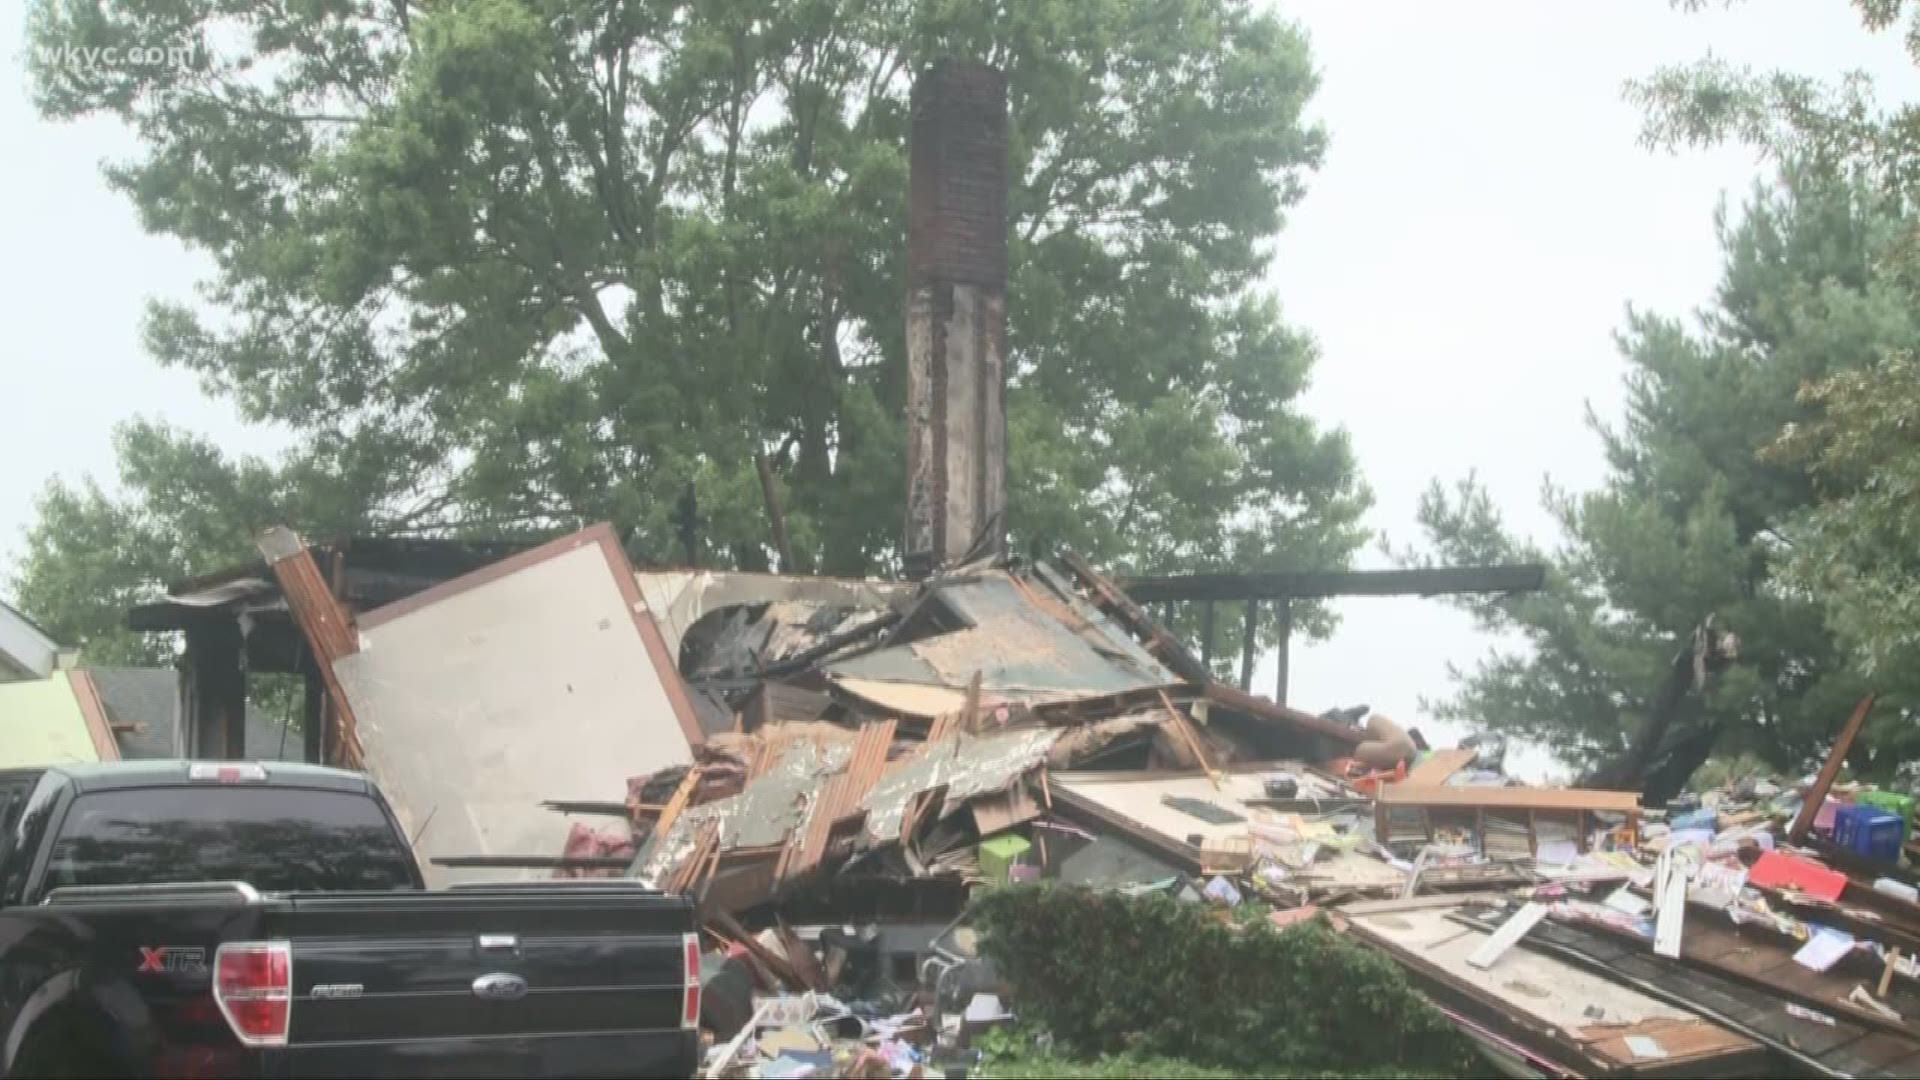 Capt. Doug Hunter of the Wayne County Sheriff’s Department said that racial slurs were found spray painted at the property where the home exploded and collapsed Wednesday in the 6700 block of Spruce Street in Sterling.